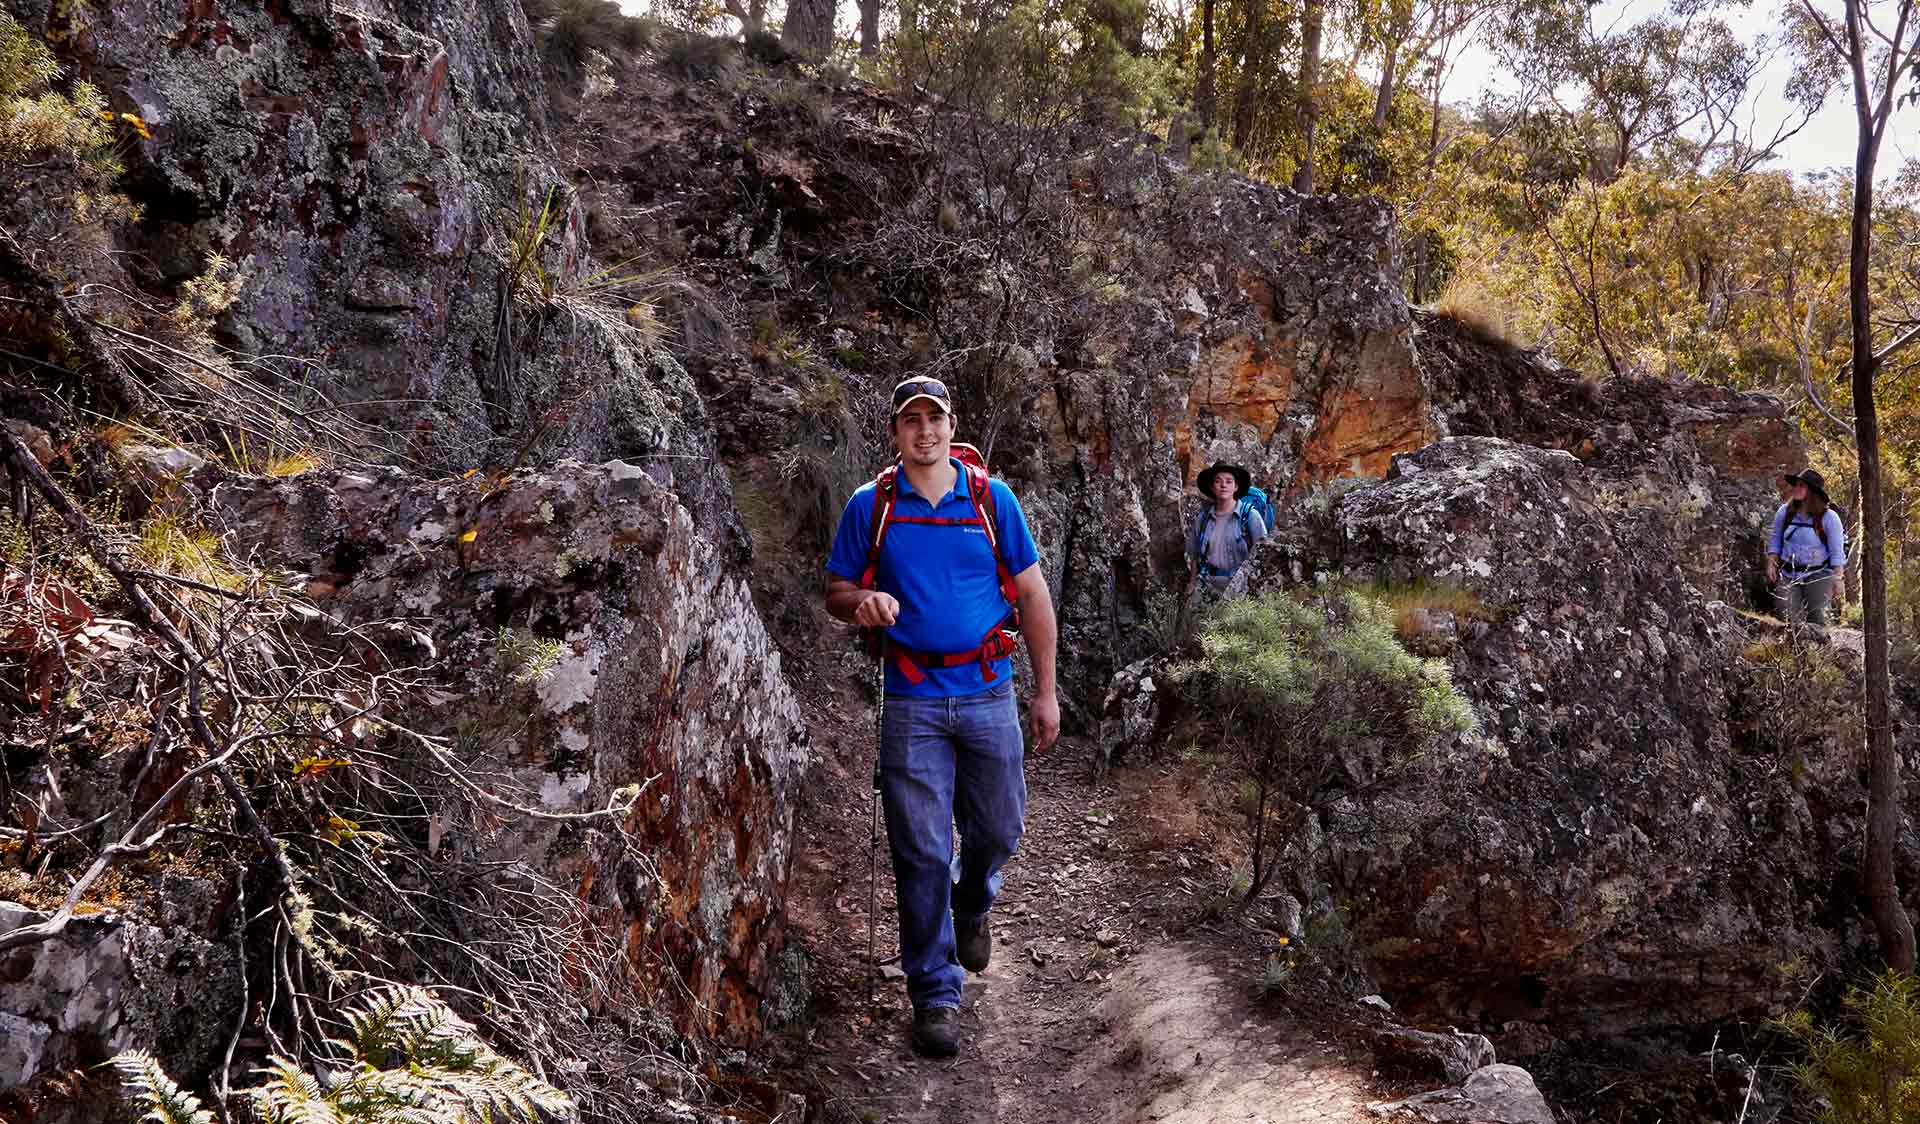 A man wearing a blue shirt and jeans walks along the Back Byers Track with two companions.